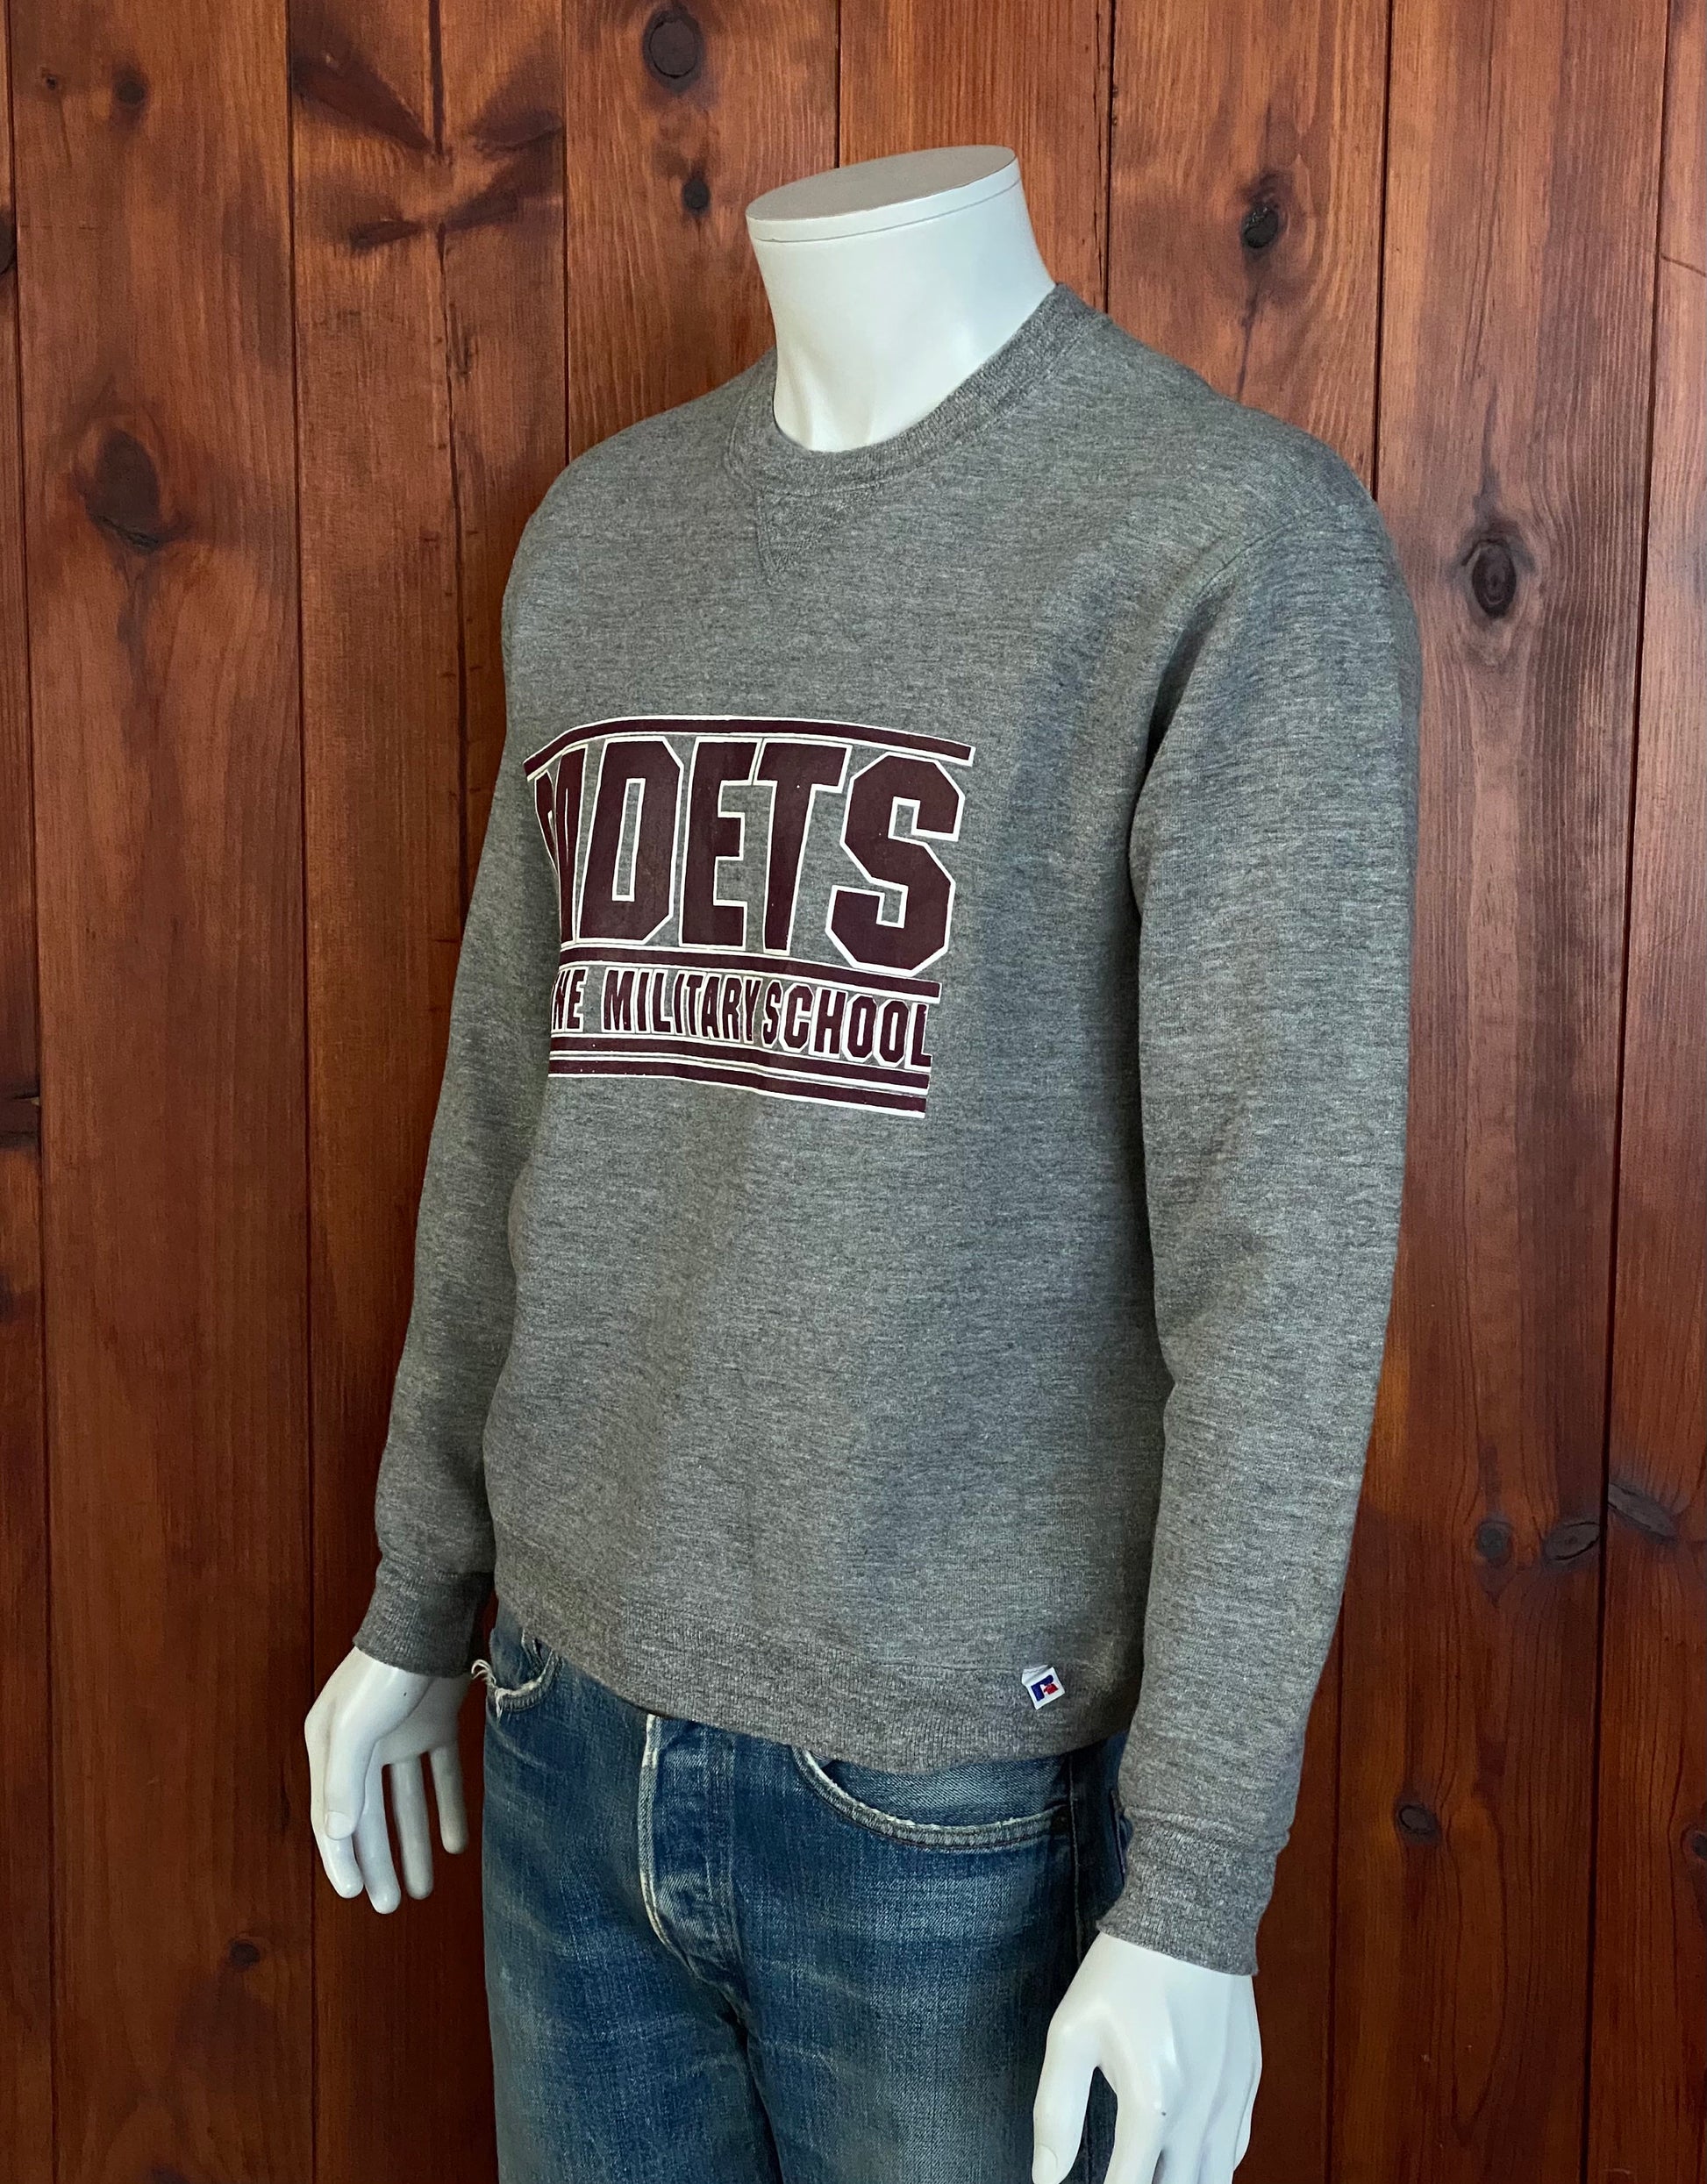 Vintage 80s sweatshirt made by Russell, size M - Retro style with American craftsmanship.